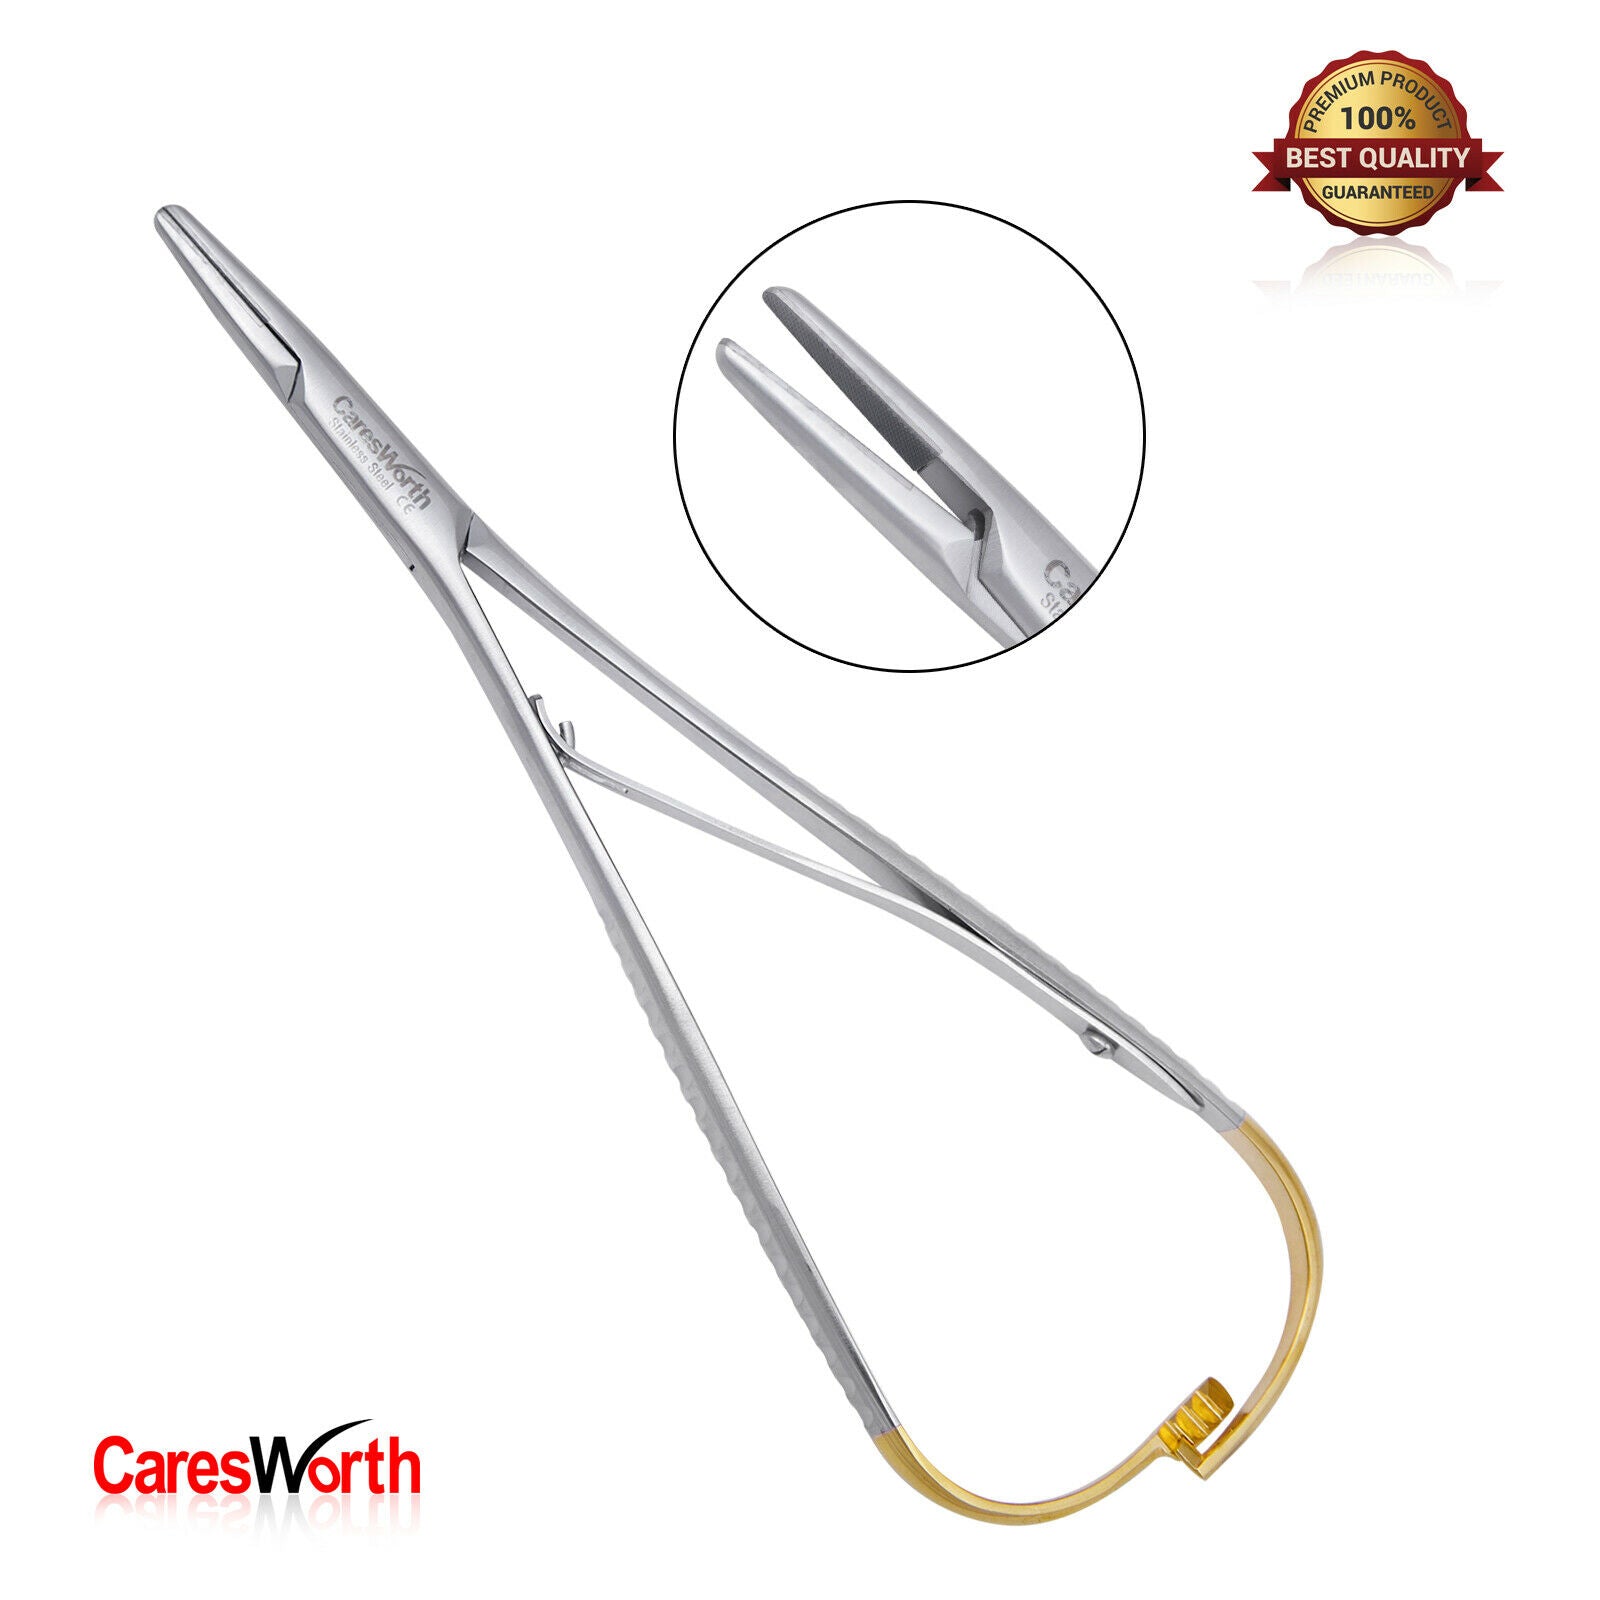 Mathieu Needle Holder, Forceps 17cm with Tungsten Carbide Inserts Surgical Dental Veterinary Instrument